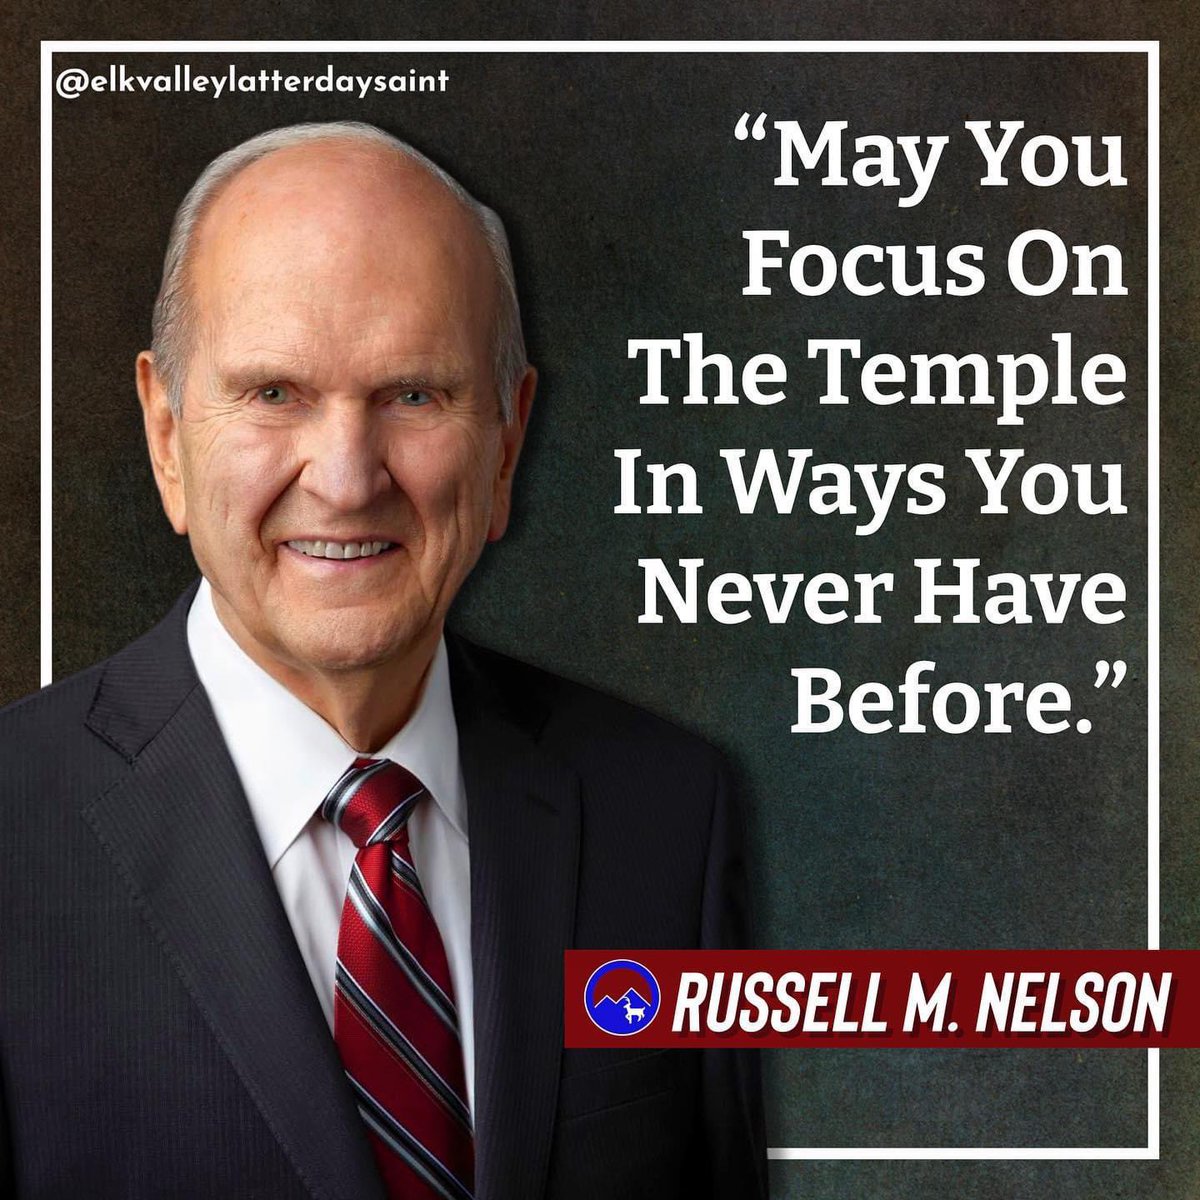 “May you focus on the temple in ways you never have before.” ~ President Russell M. Nelson 

#LDSTemples #FamiliesCanBeForever #ChildrenOfGod #GodLovesYou #EternalLife #HearHim #ShareGoodness #TrustGod #ComeUntoChrist #CountOnHim #TheChurchOfJesusChristOfLatterDaySaints